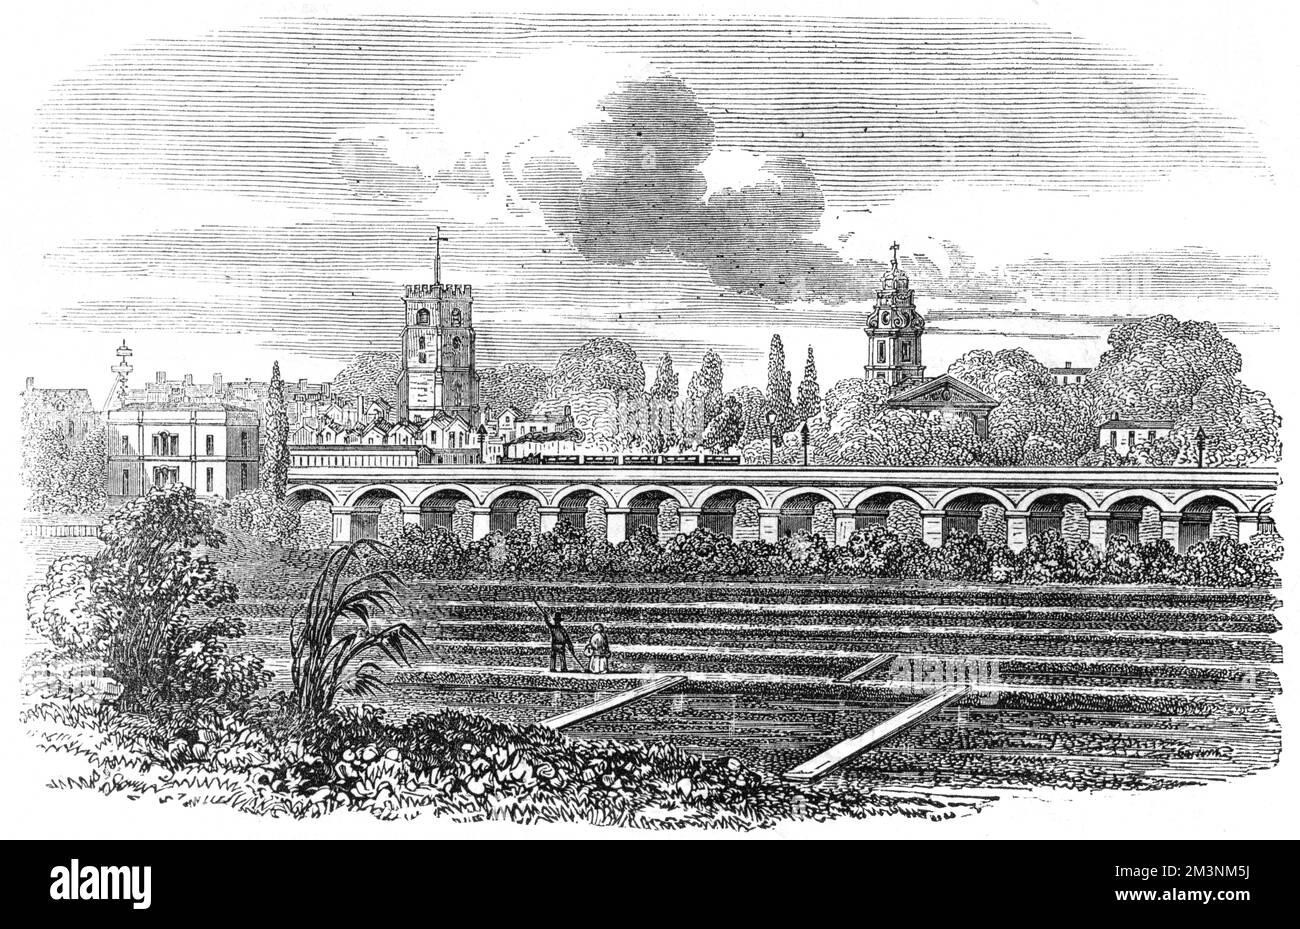 The Camden-town Railway at Hackney Station, with a watercress plantation alongside the track.  1851 Stock Photo